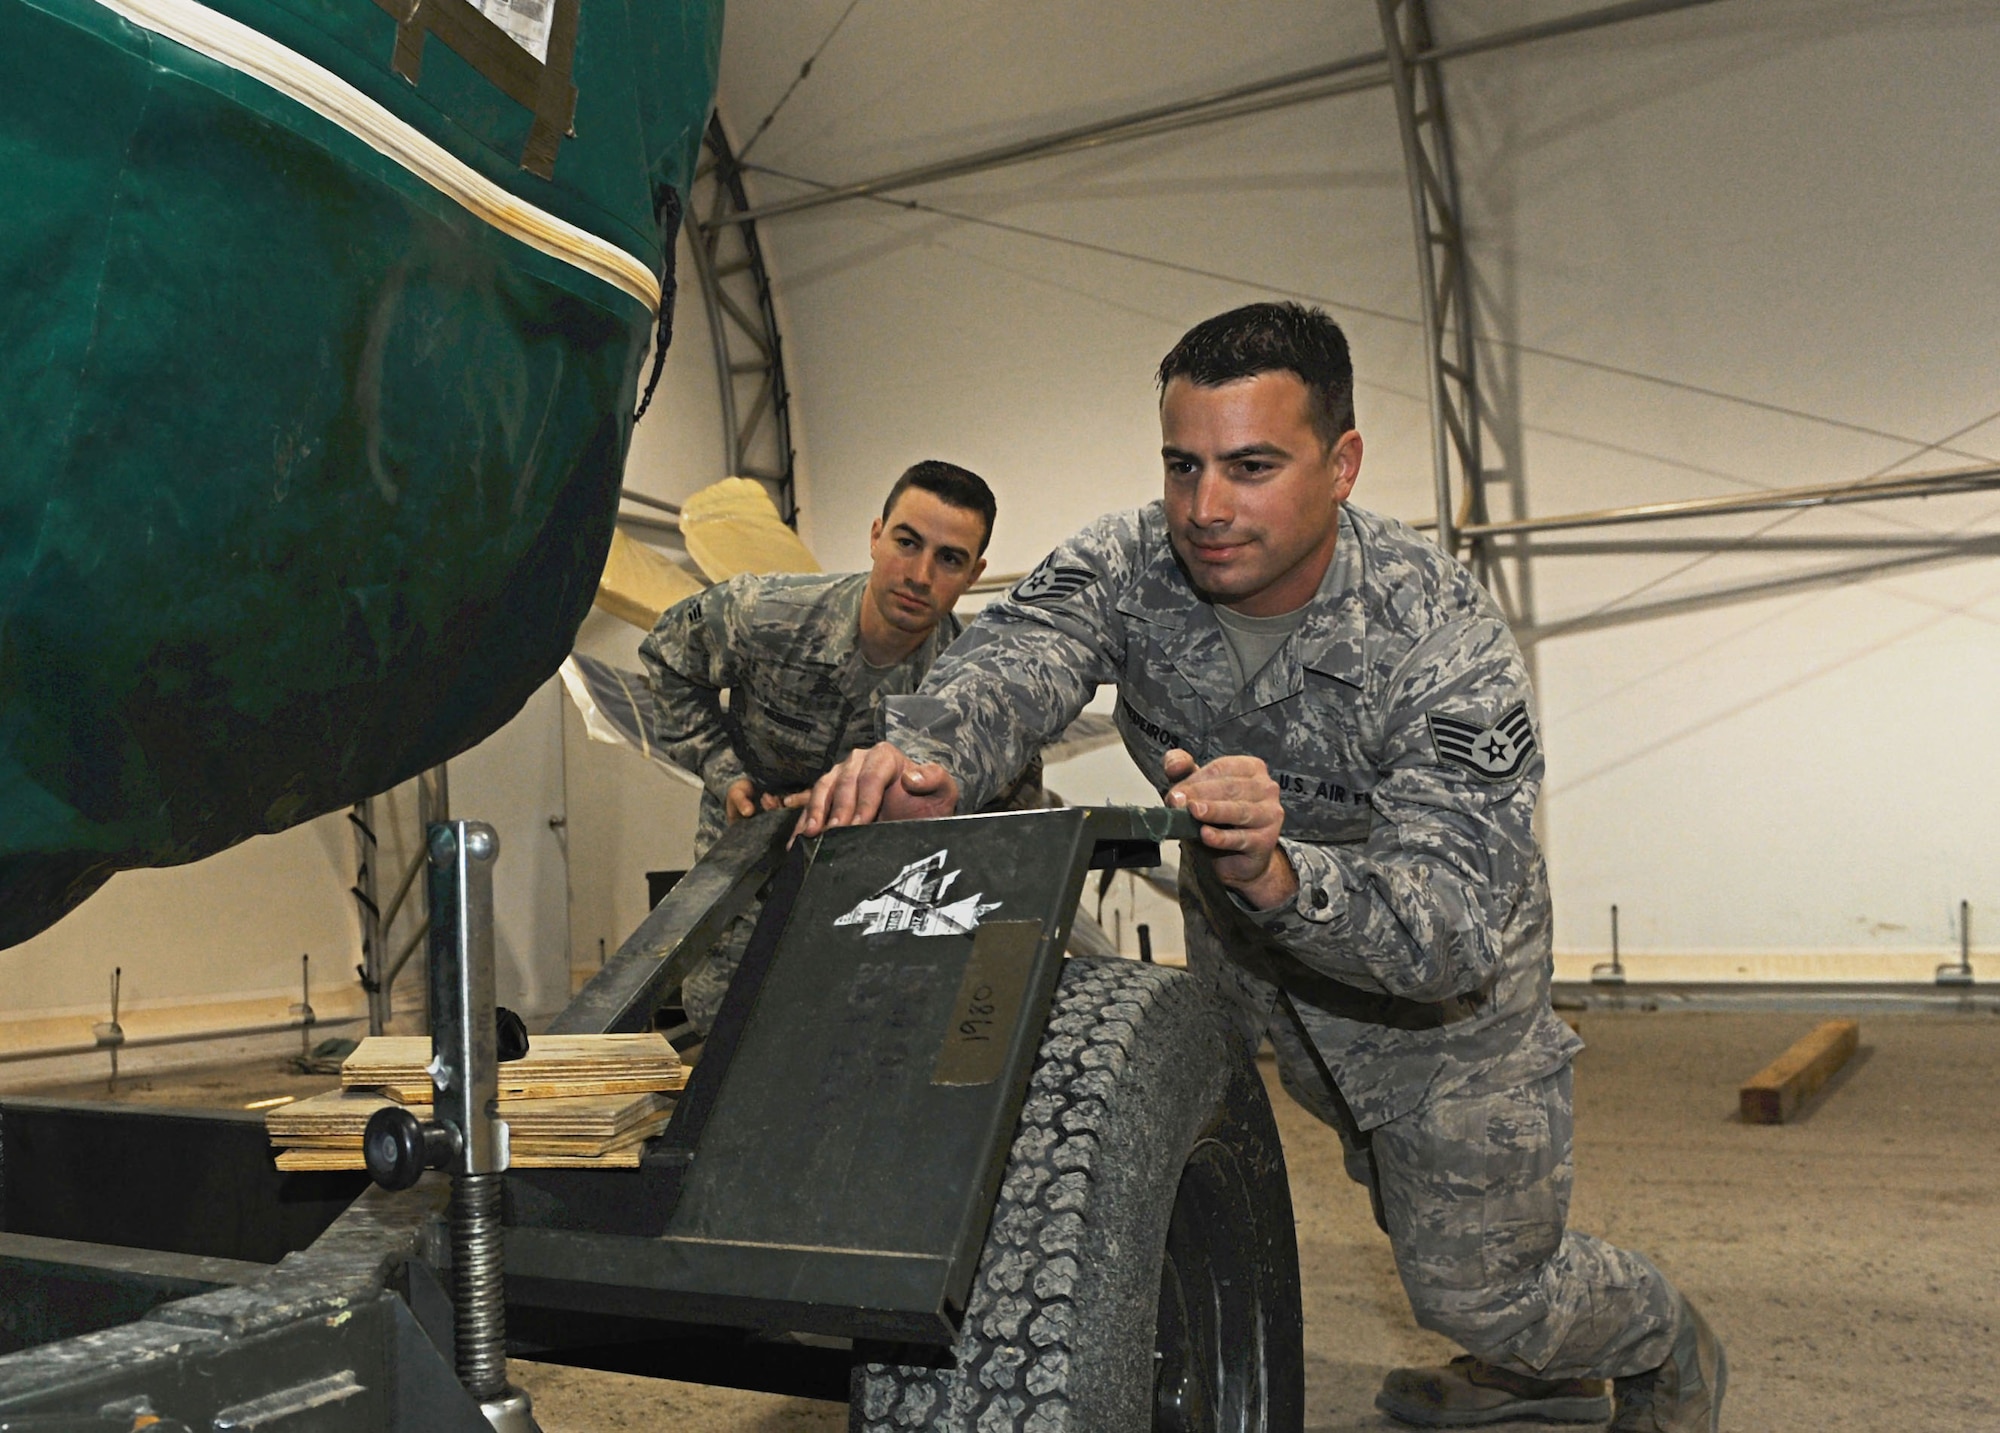 Senior Airman Barrington and Staff Sgt. William Medeiros both from the 386th Expeditionary Aircraft Maintenance Squadron, prepares a spare engine for a C-130 J, undisclosed location Southeast Asia. The Medeiros brothers deployed out of the 143rd Airlift Wing Rhode Island Air National Guard, Quonset Point Air National Guard Station and are natives of Rhode Island. (U.S. Air Force photo by Senior Airman Desiree W. Moye)